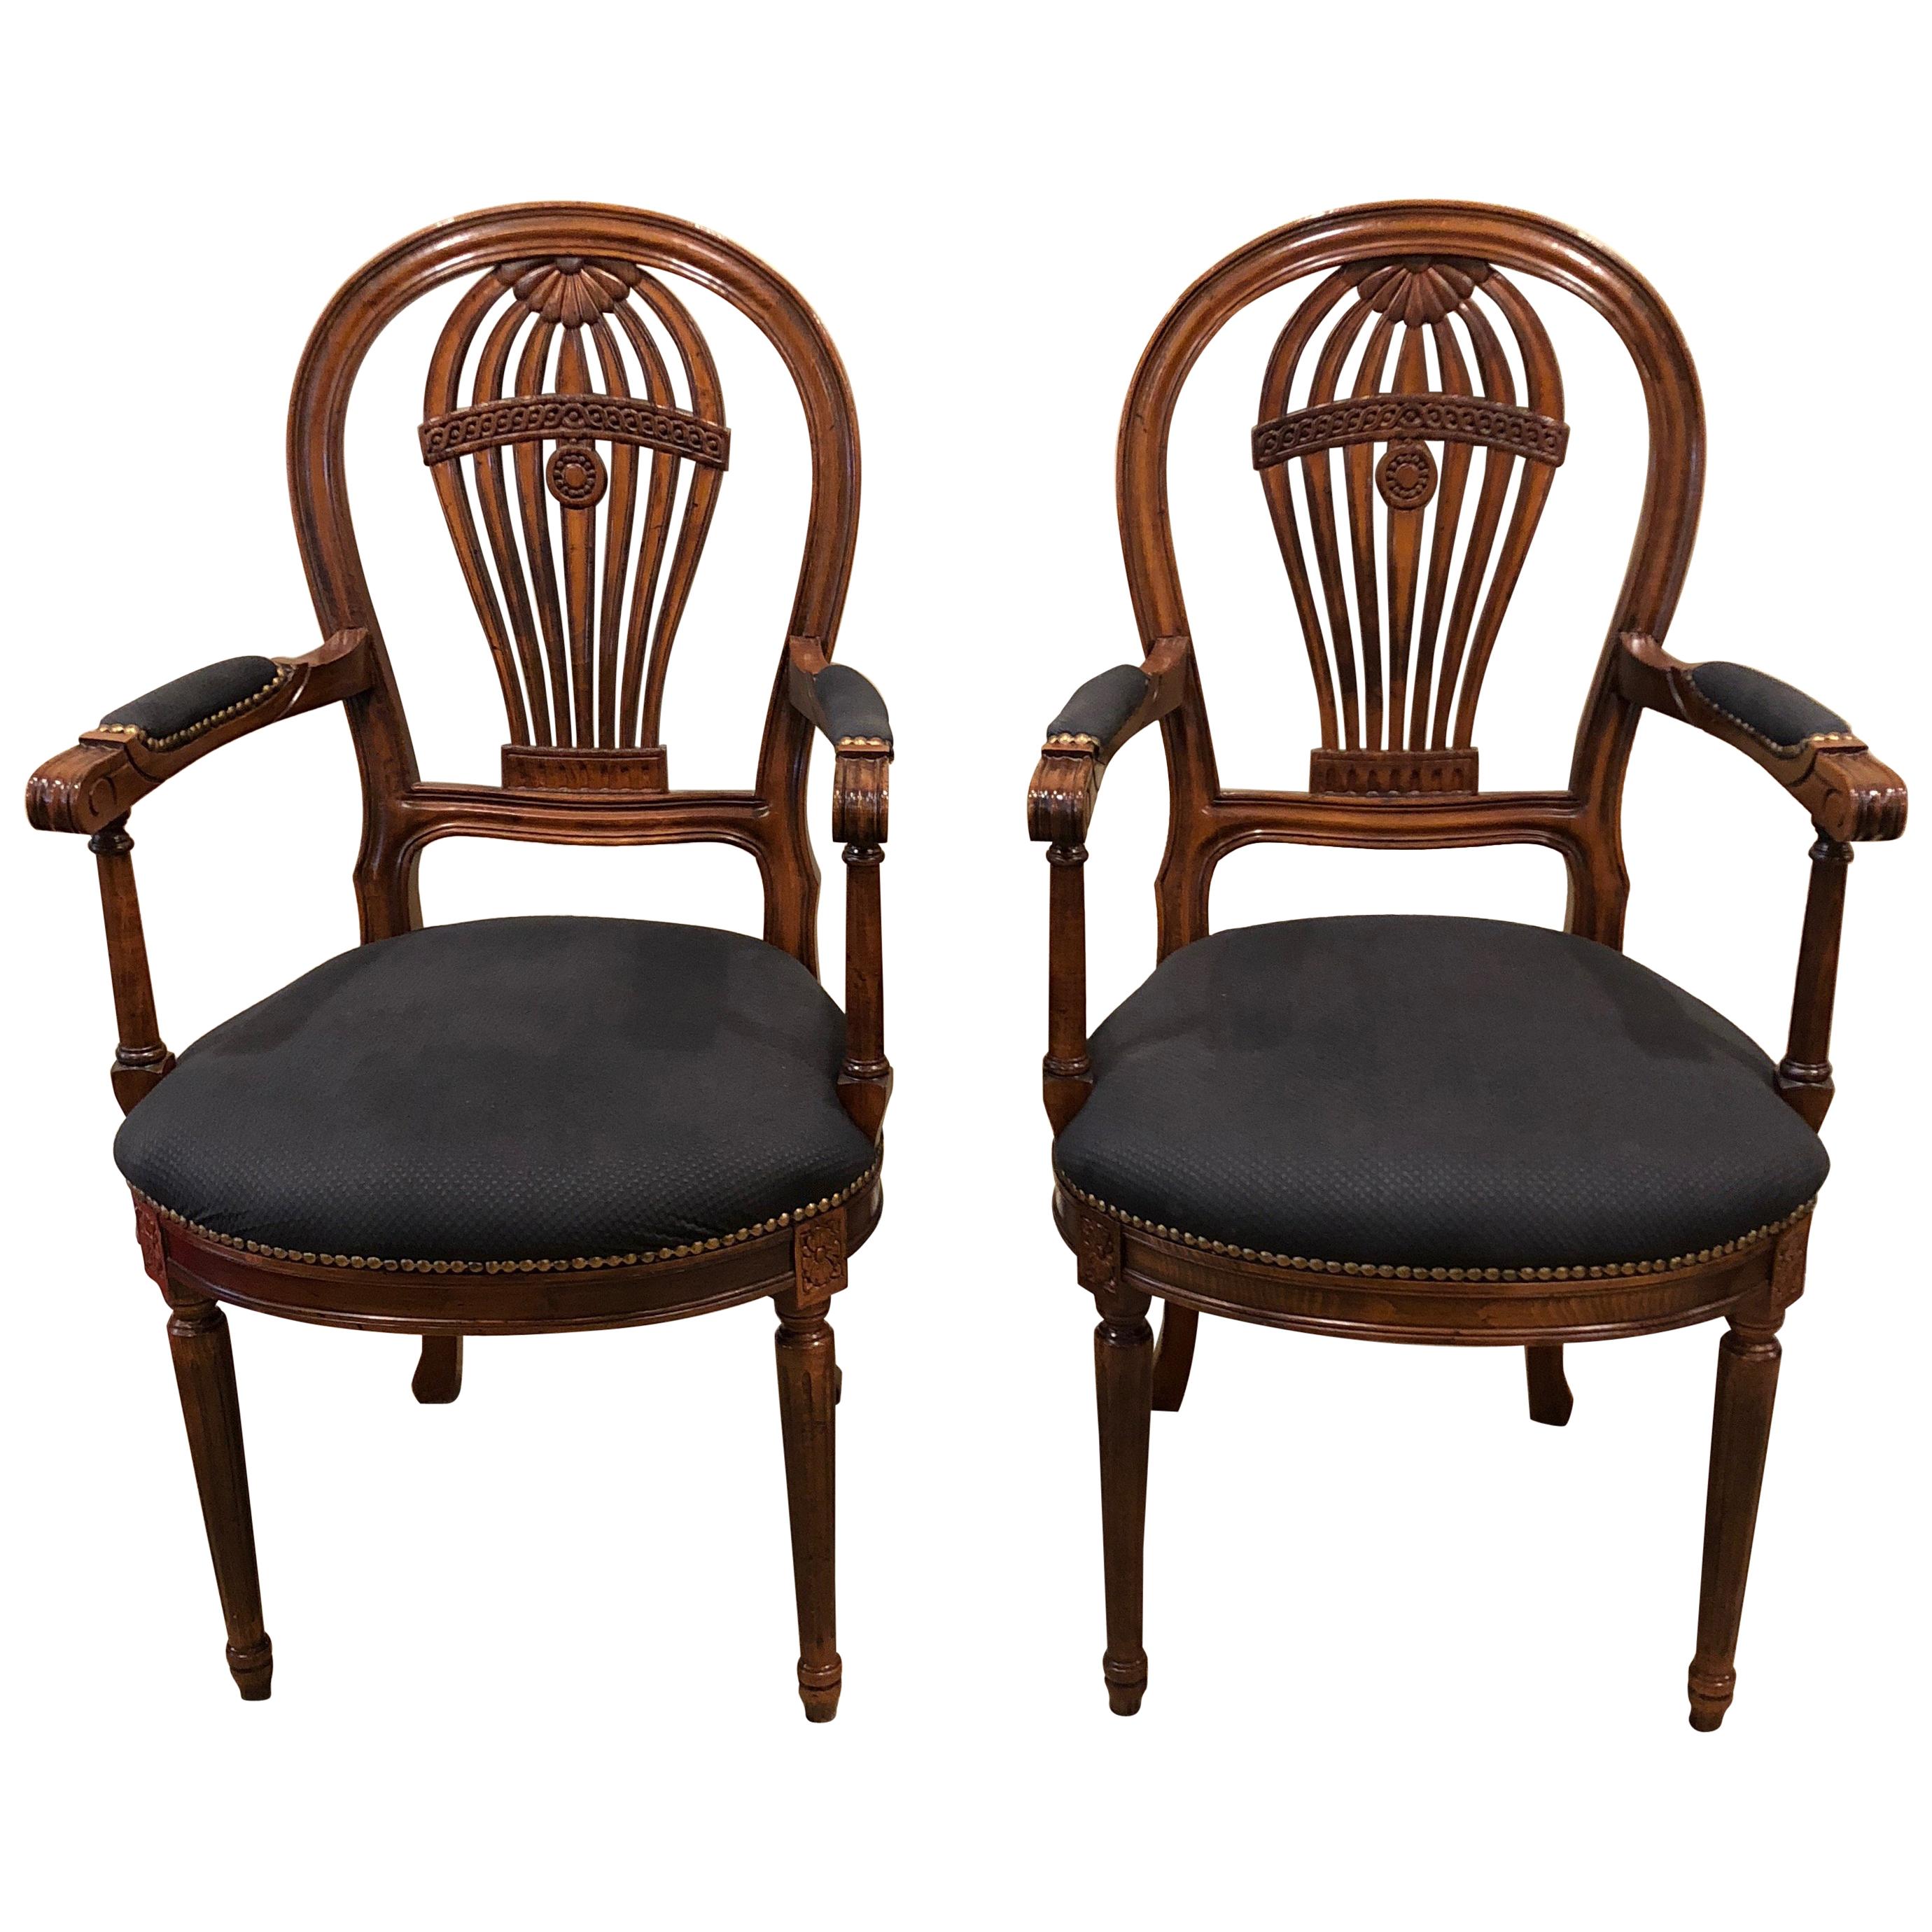 Pair of Beautiful Fruitwood Balloon Motife Back Carved Wood Armchairs